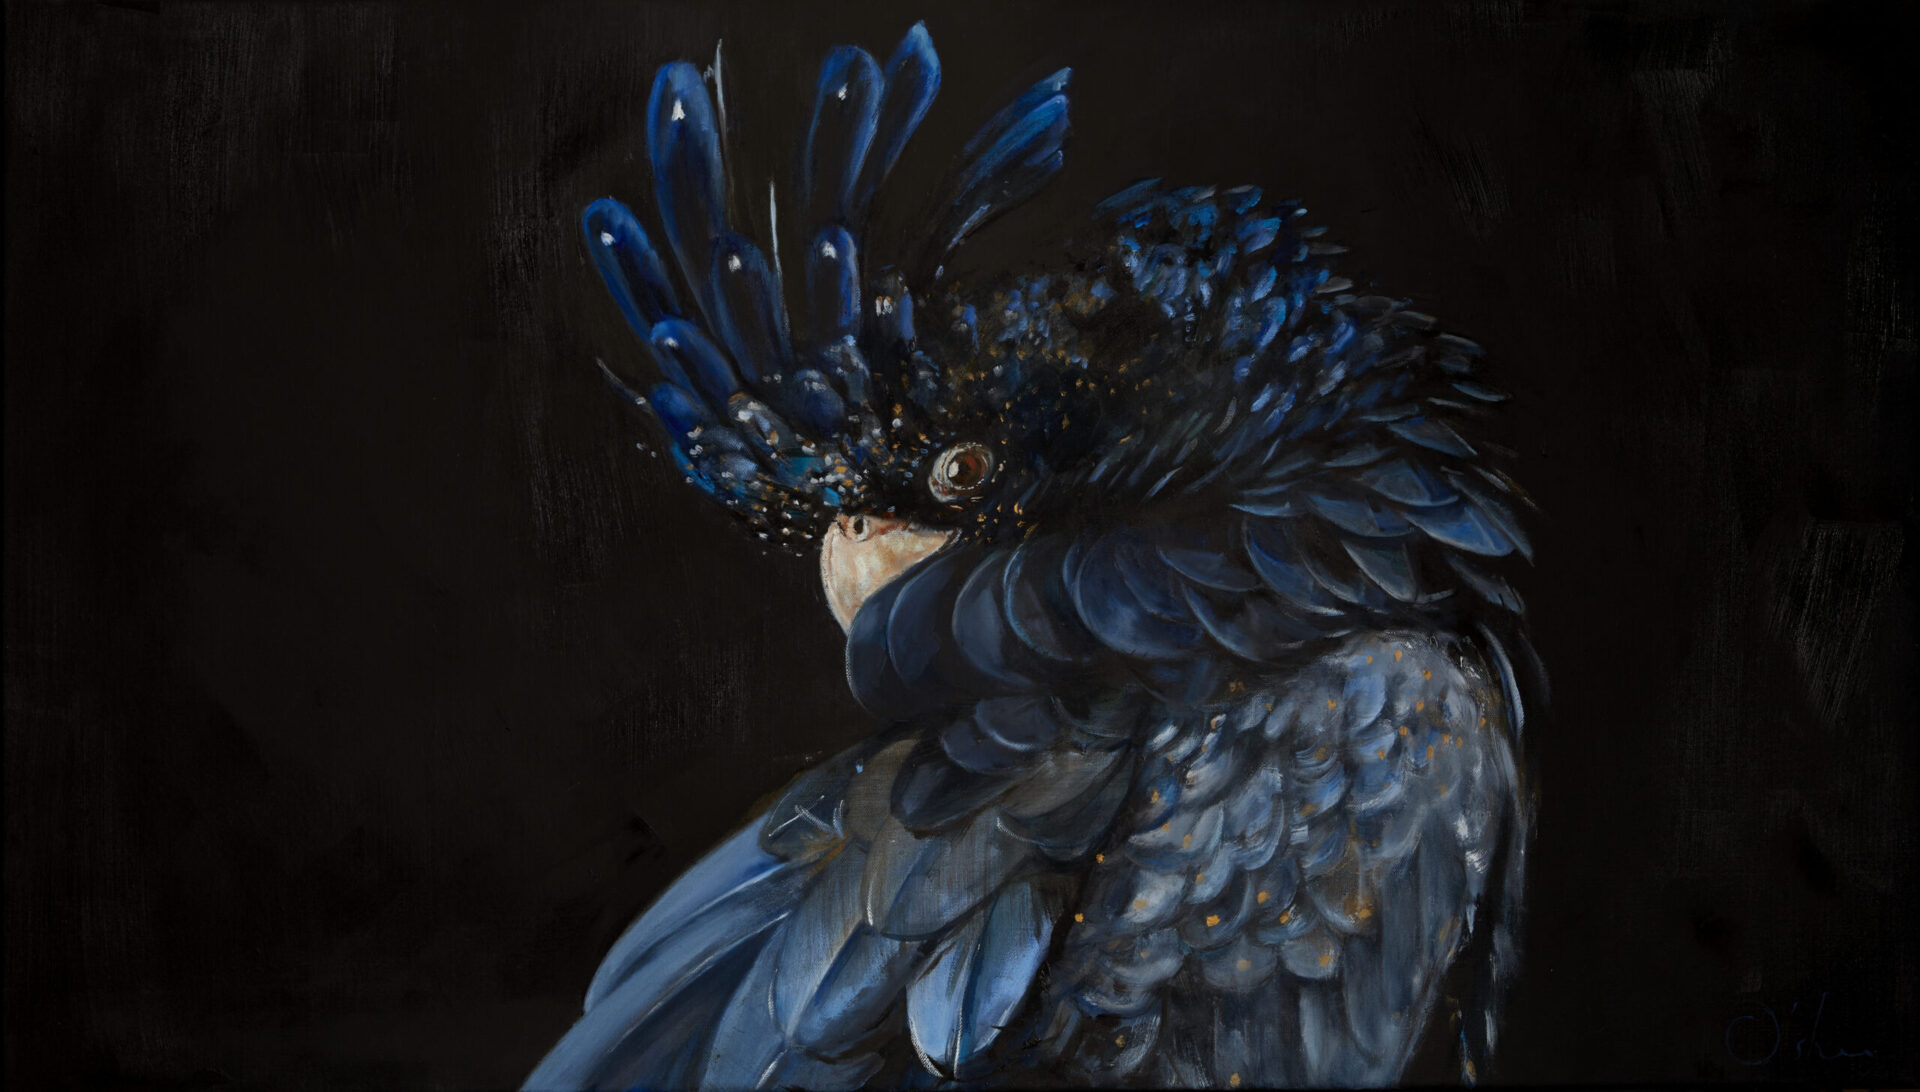 "Bluey" - a black cockatoo from my series of animal paintings.